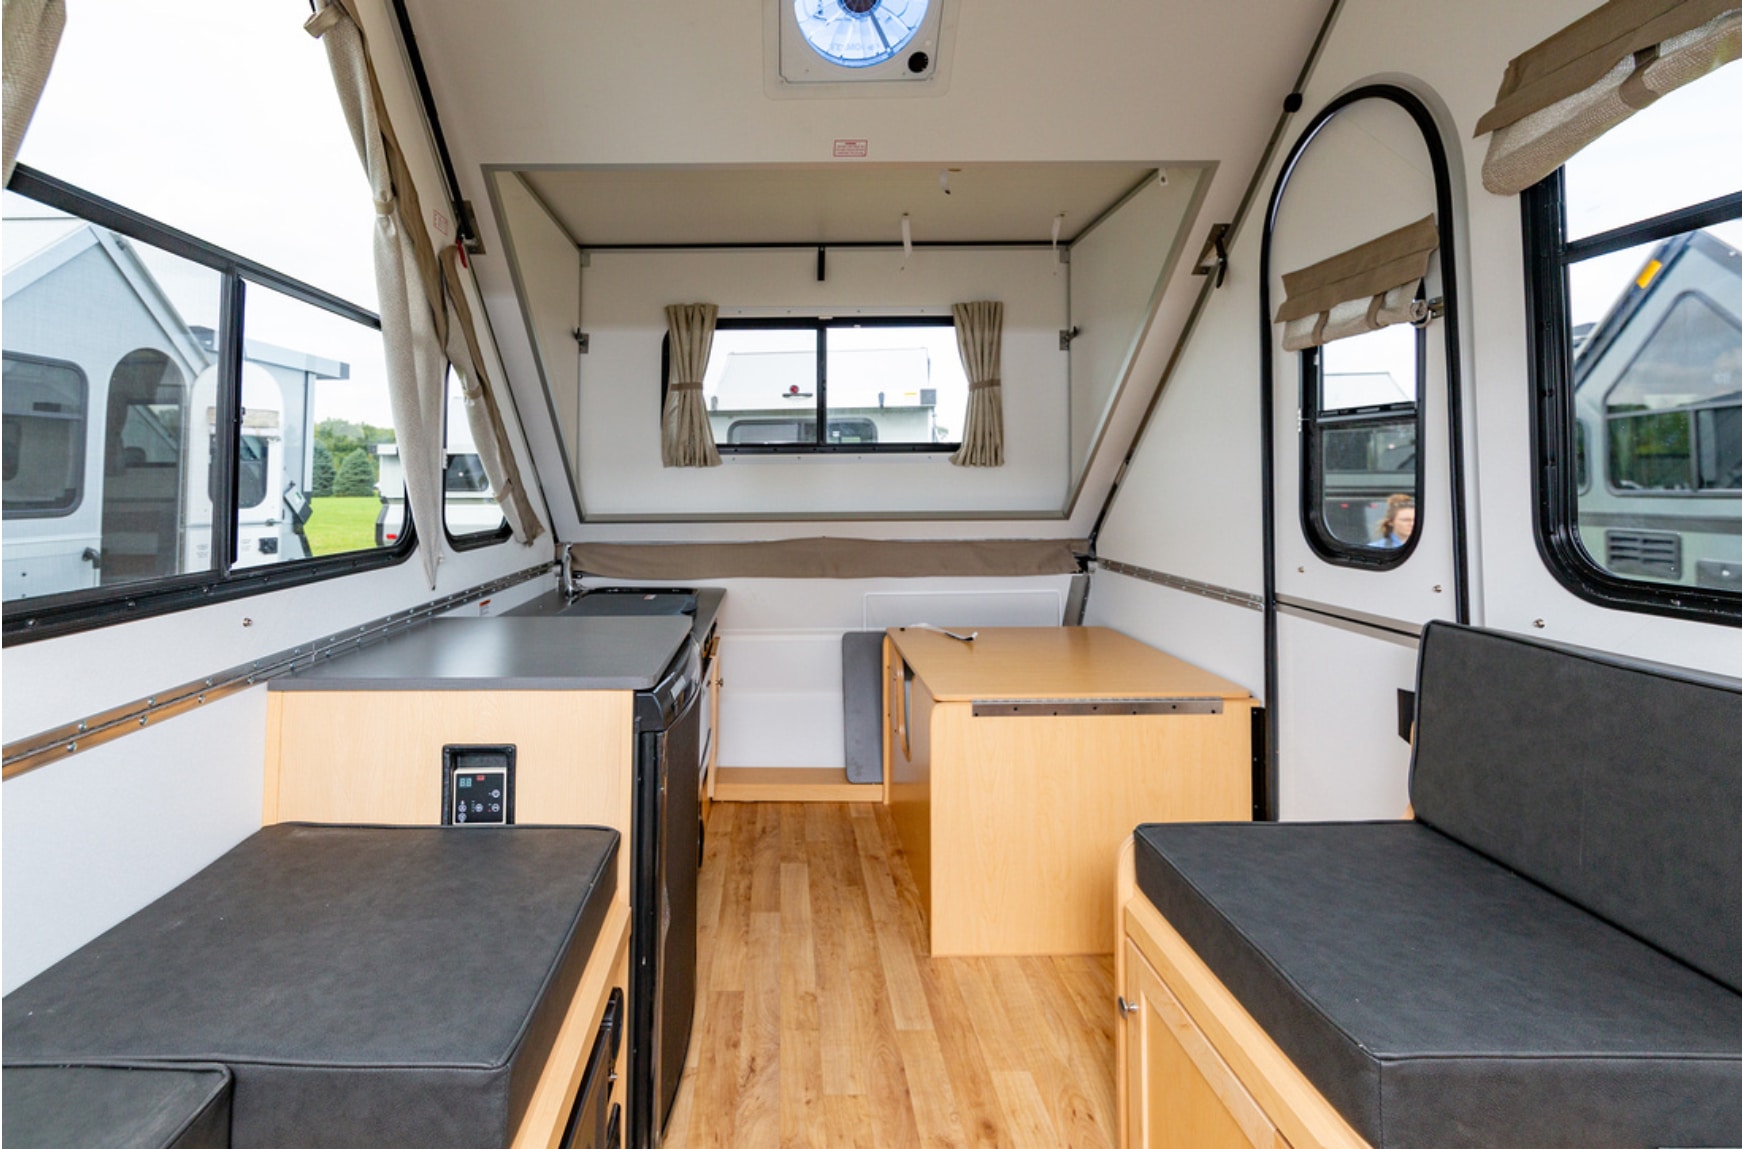 The interior of an rv with a table and chairs.